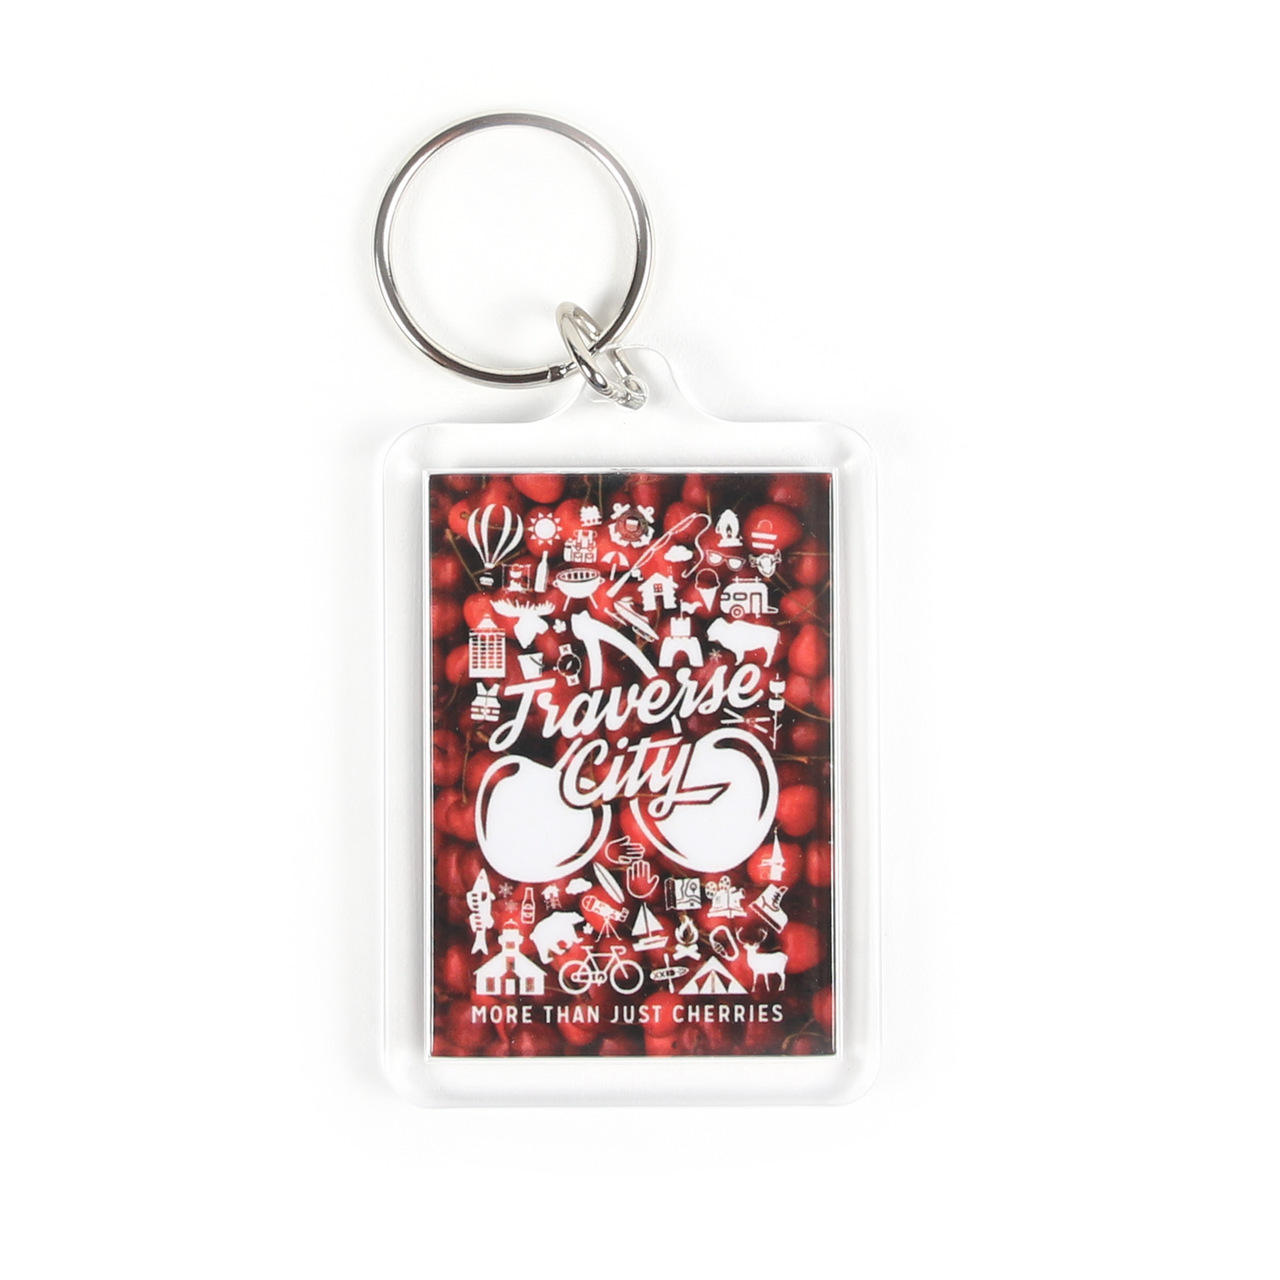 Traverse City: More Than Cherries Keychain